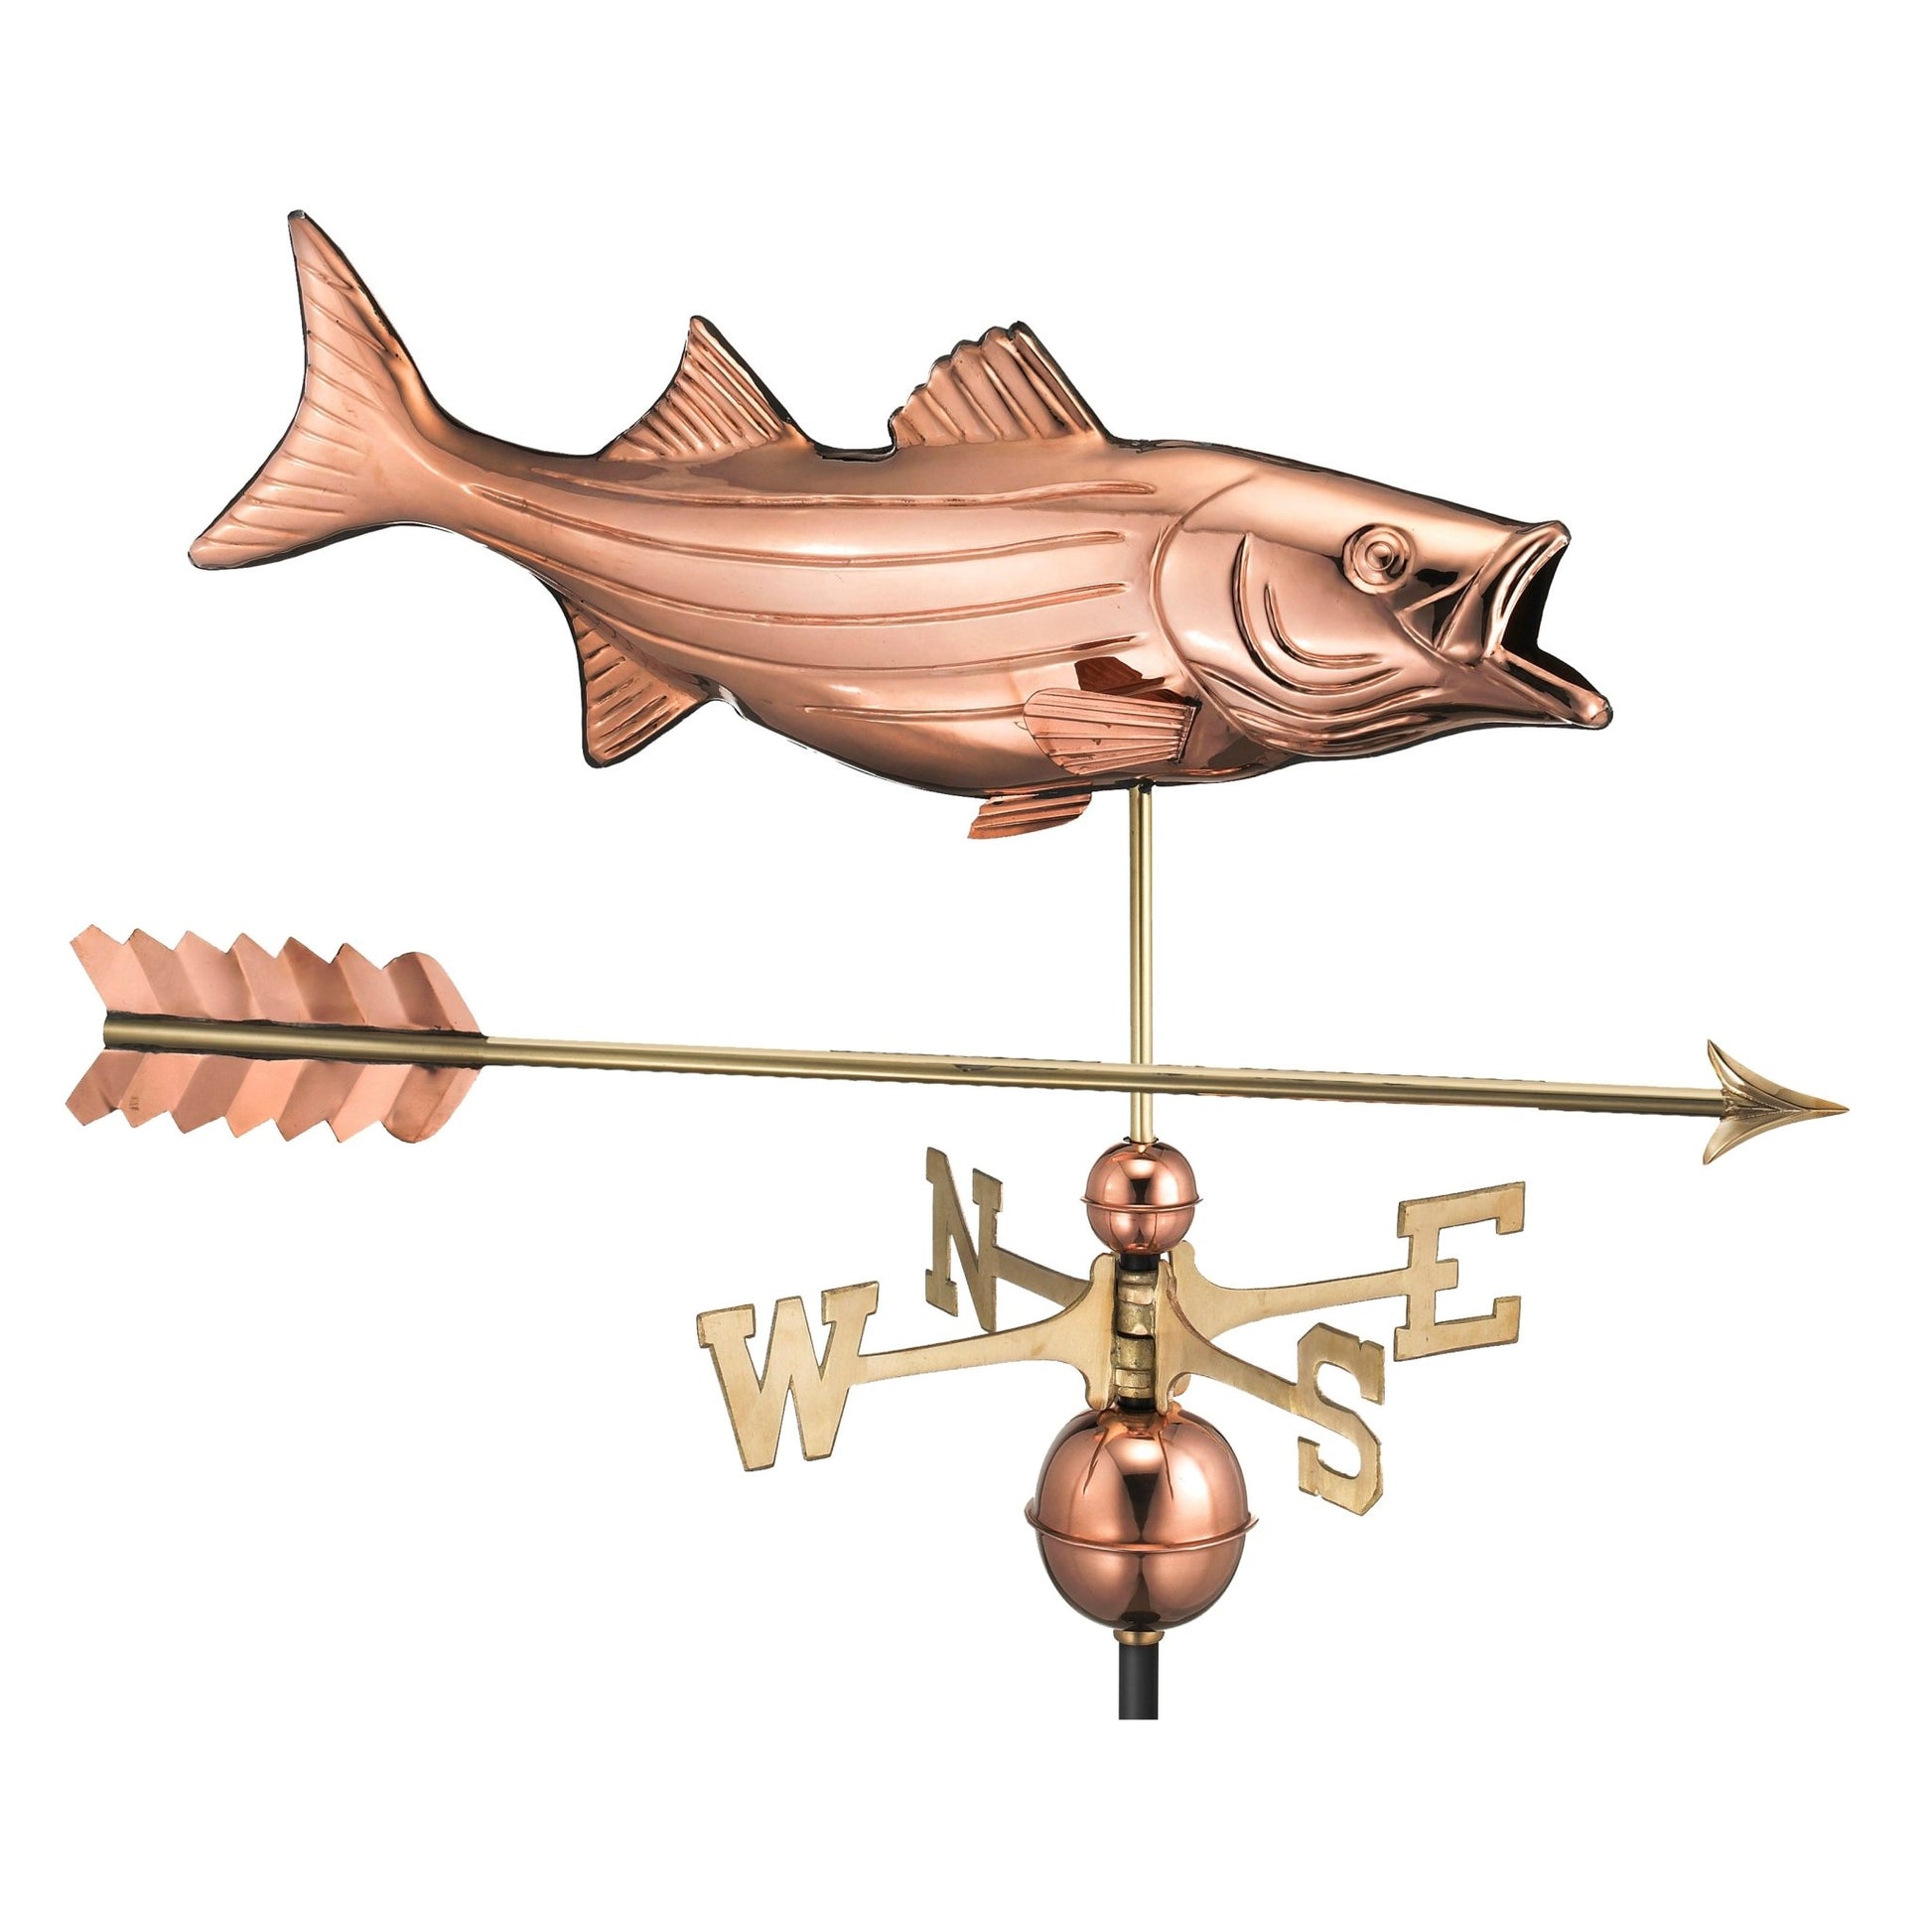 Bass with Arrow Weathervane - Good Directions